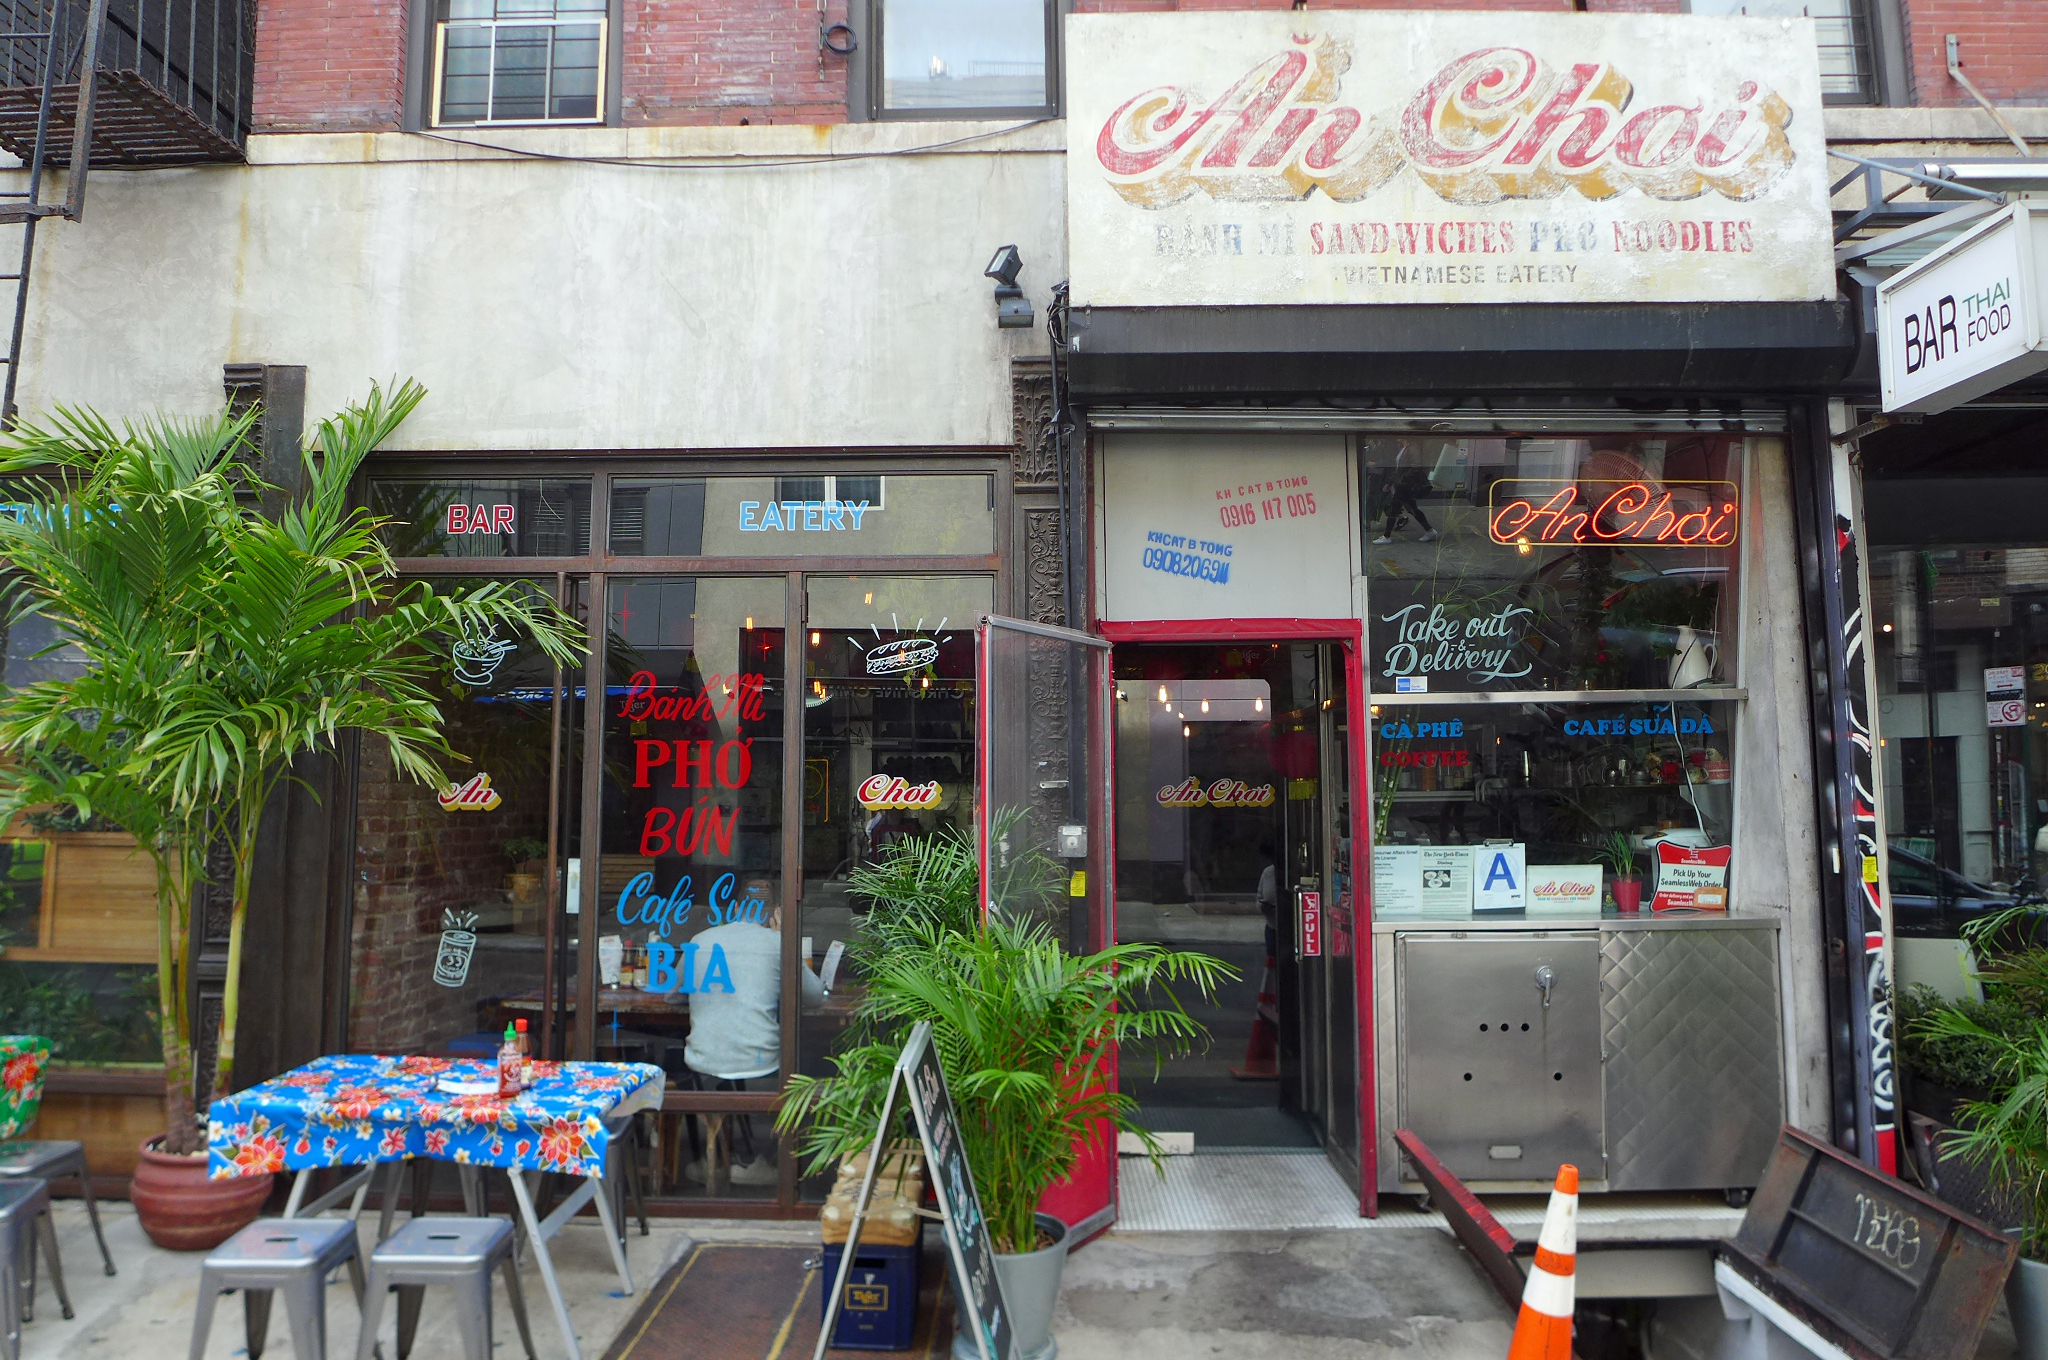 The Lower East Side’s An Choi evokes a market food stall in Vietnam